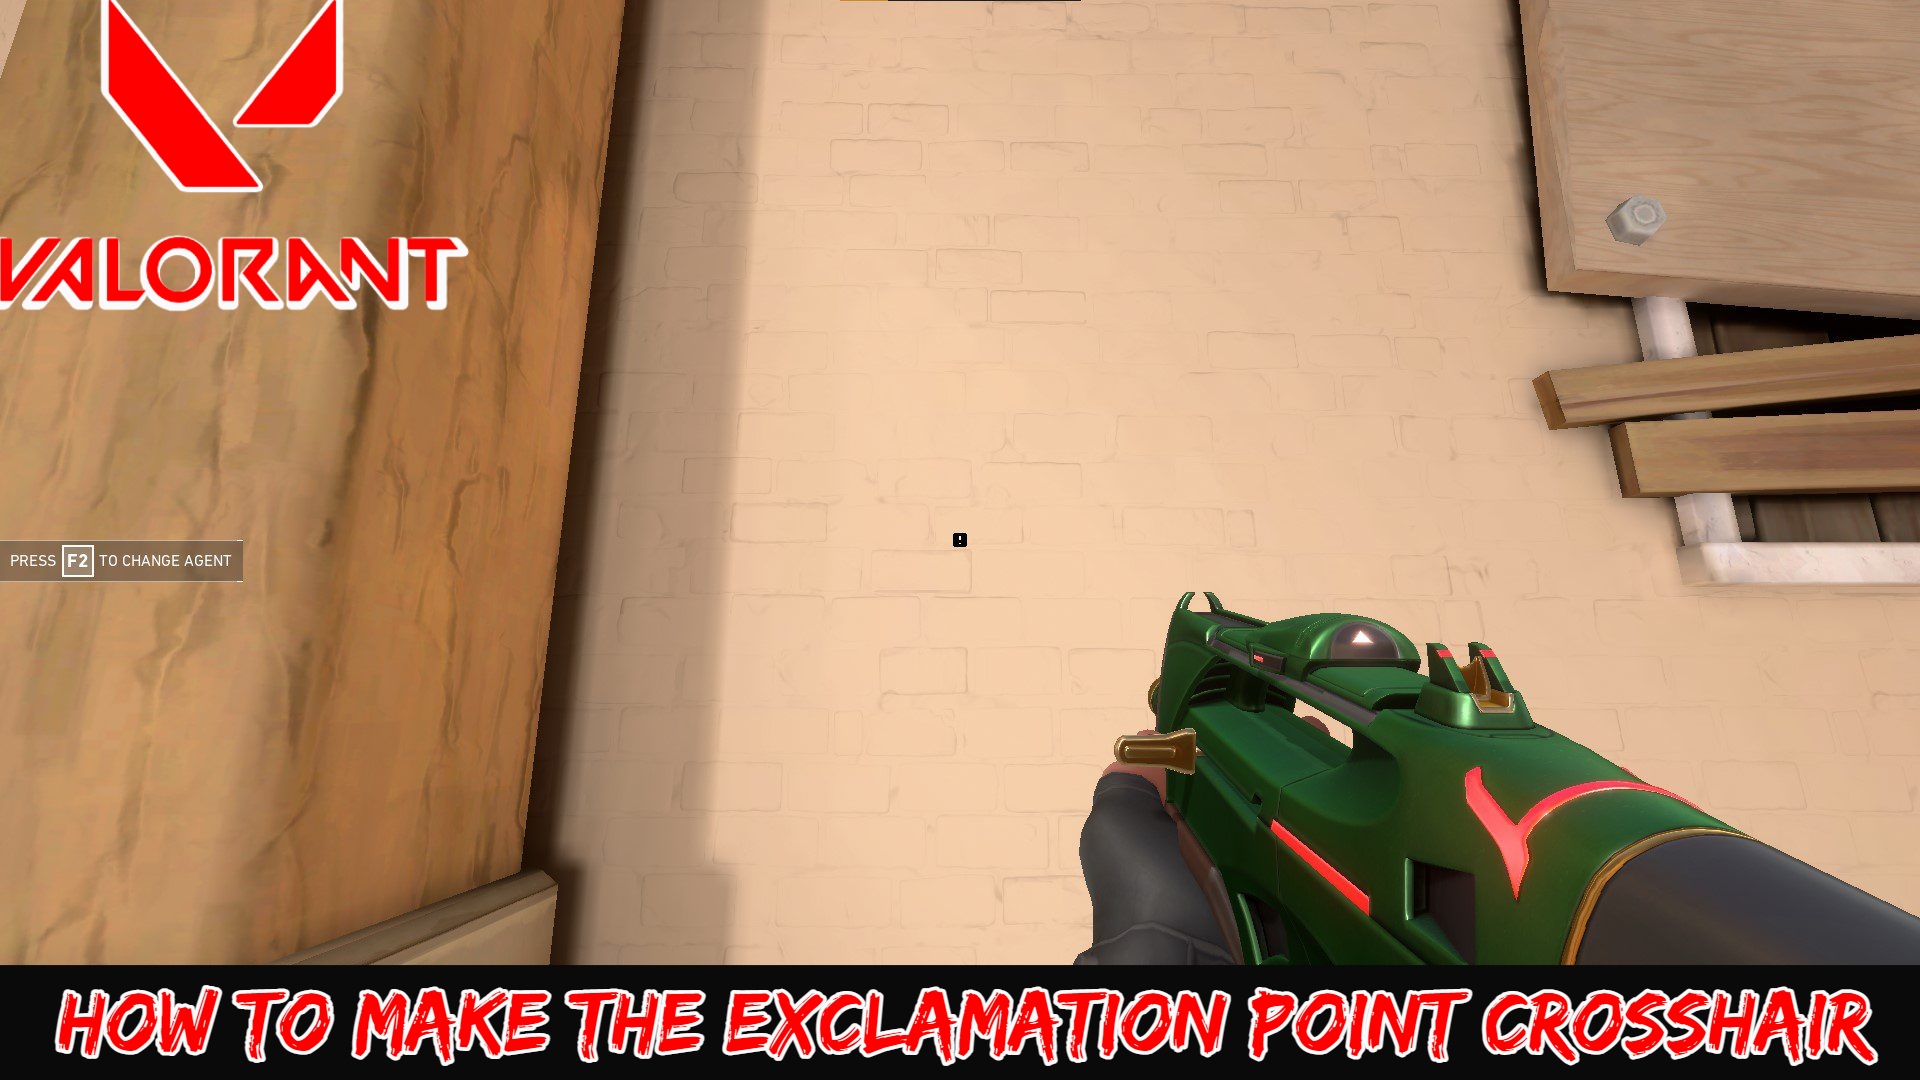 You are currently viewing Valorant: How To Make The Exclamation Point Crosshair